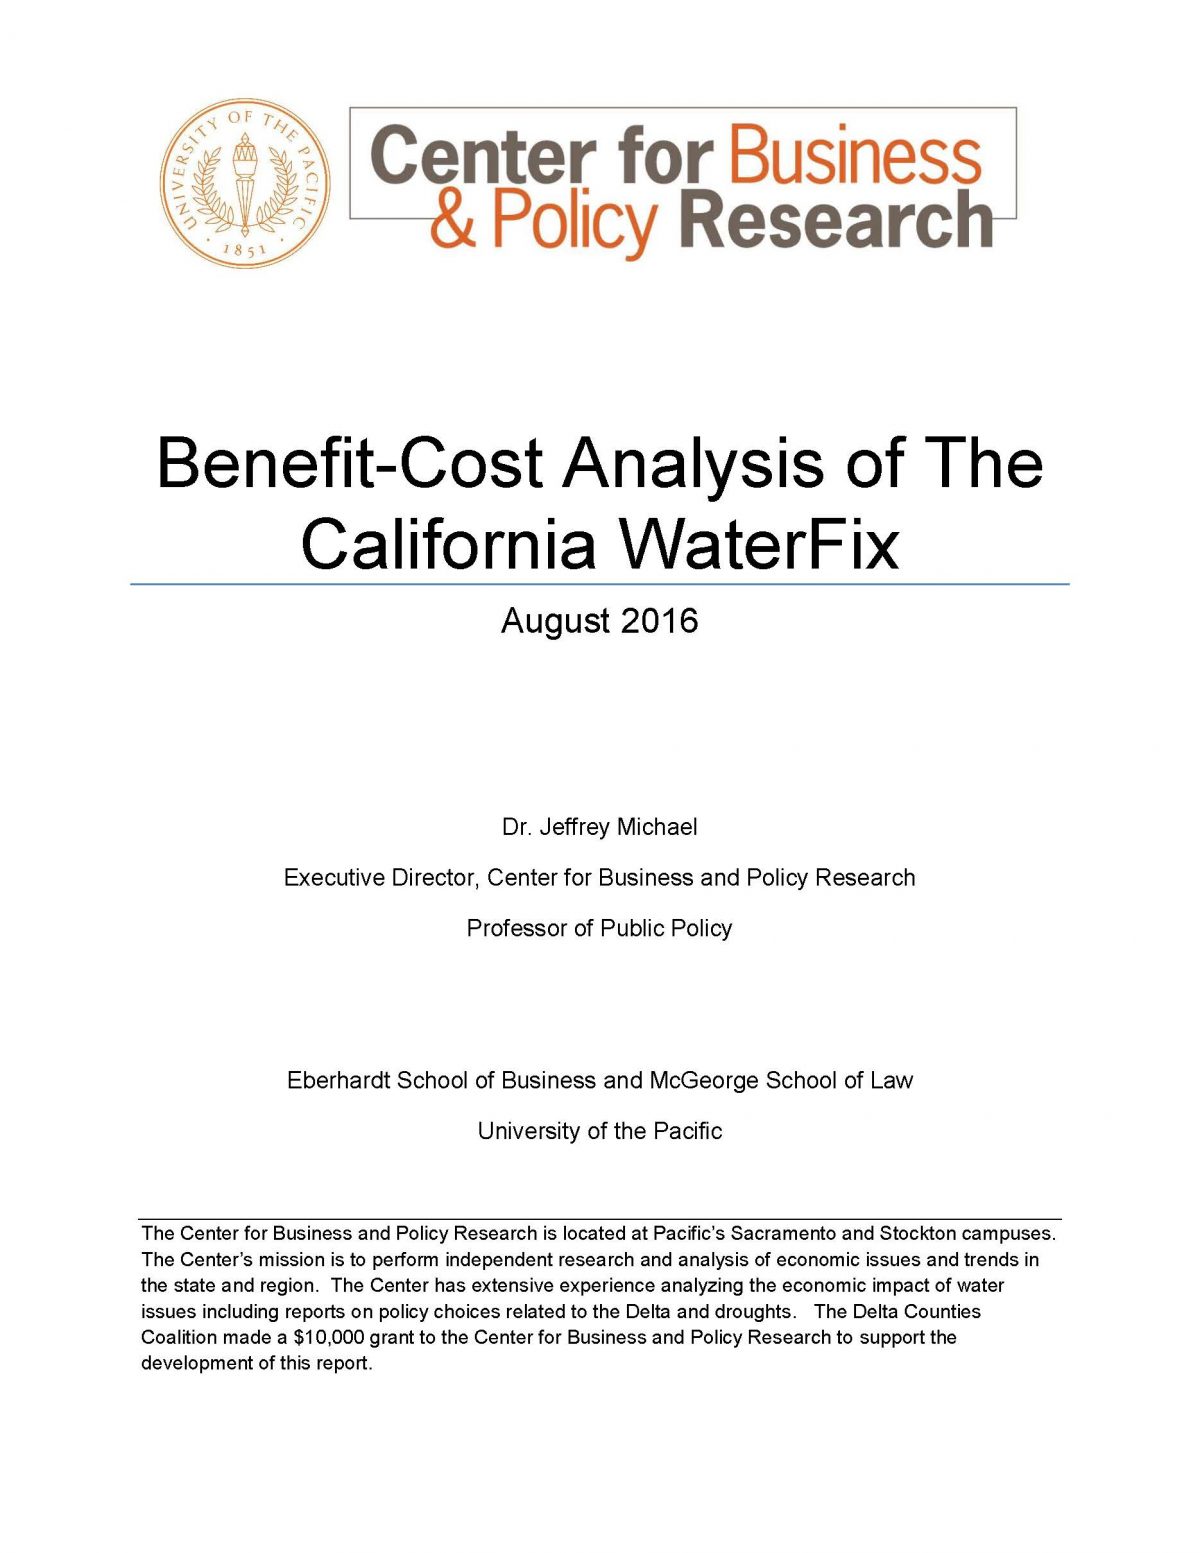 Benefit-Cost Analysis of The California WaterFix